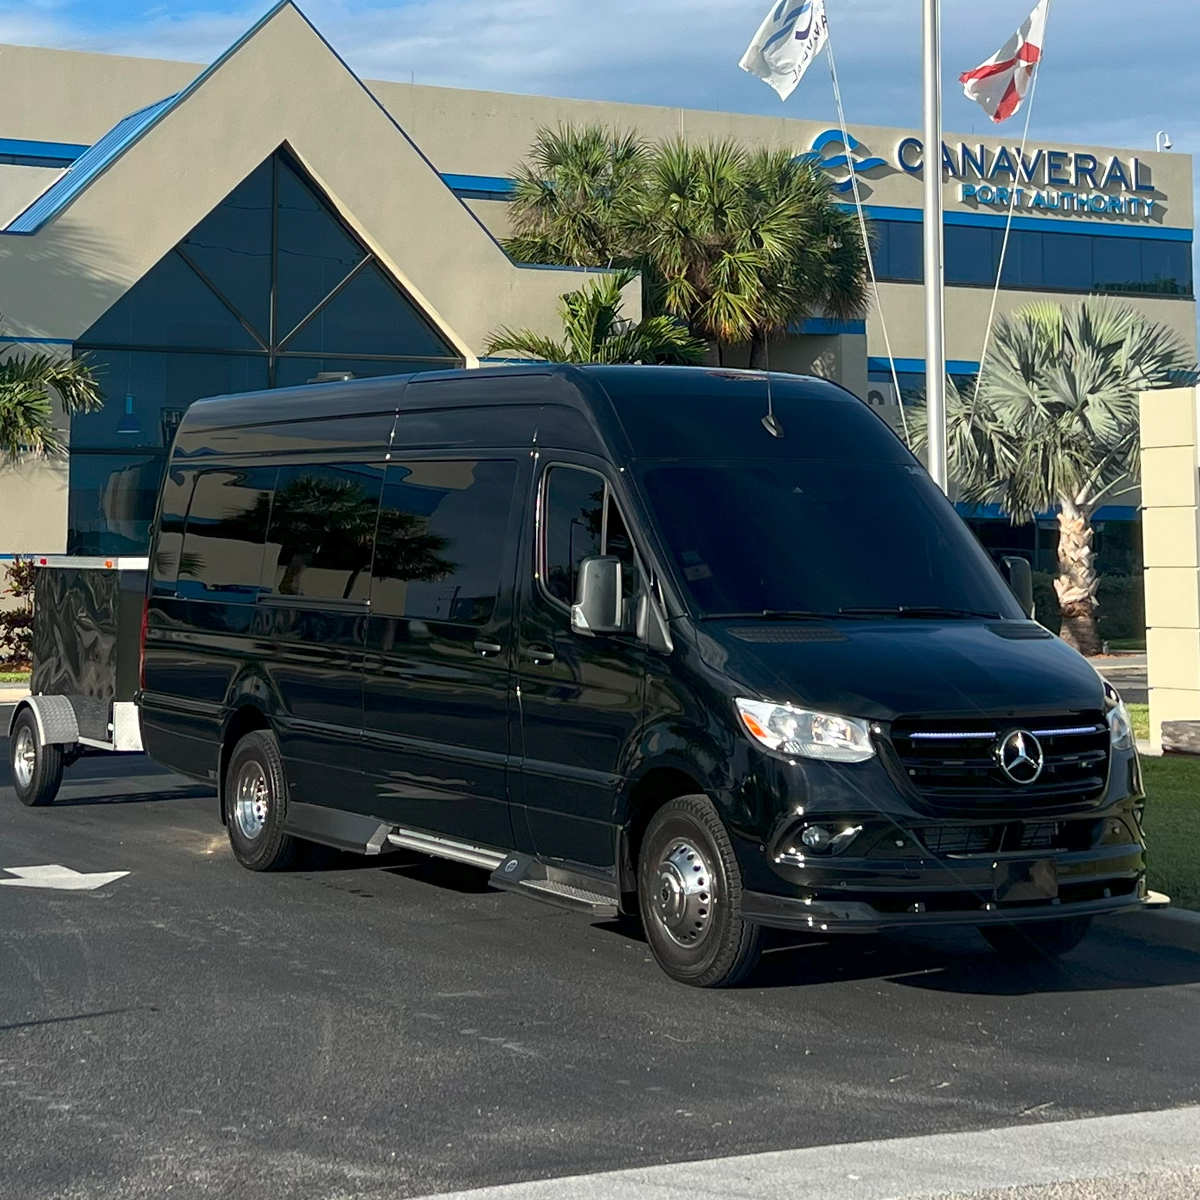 Sprinter Limousine at Port Canaveral